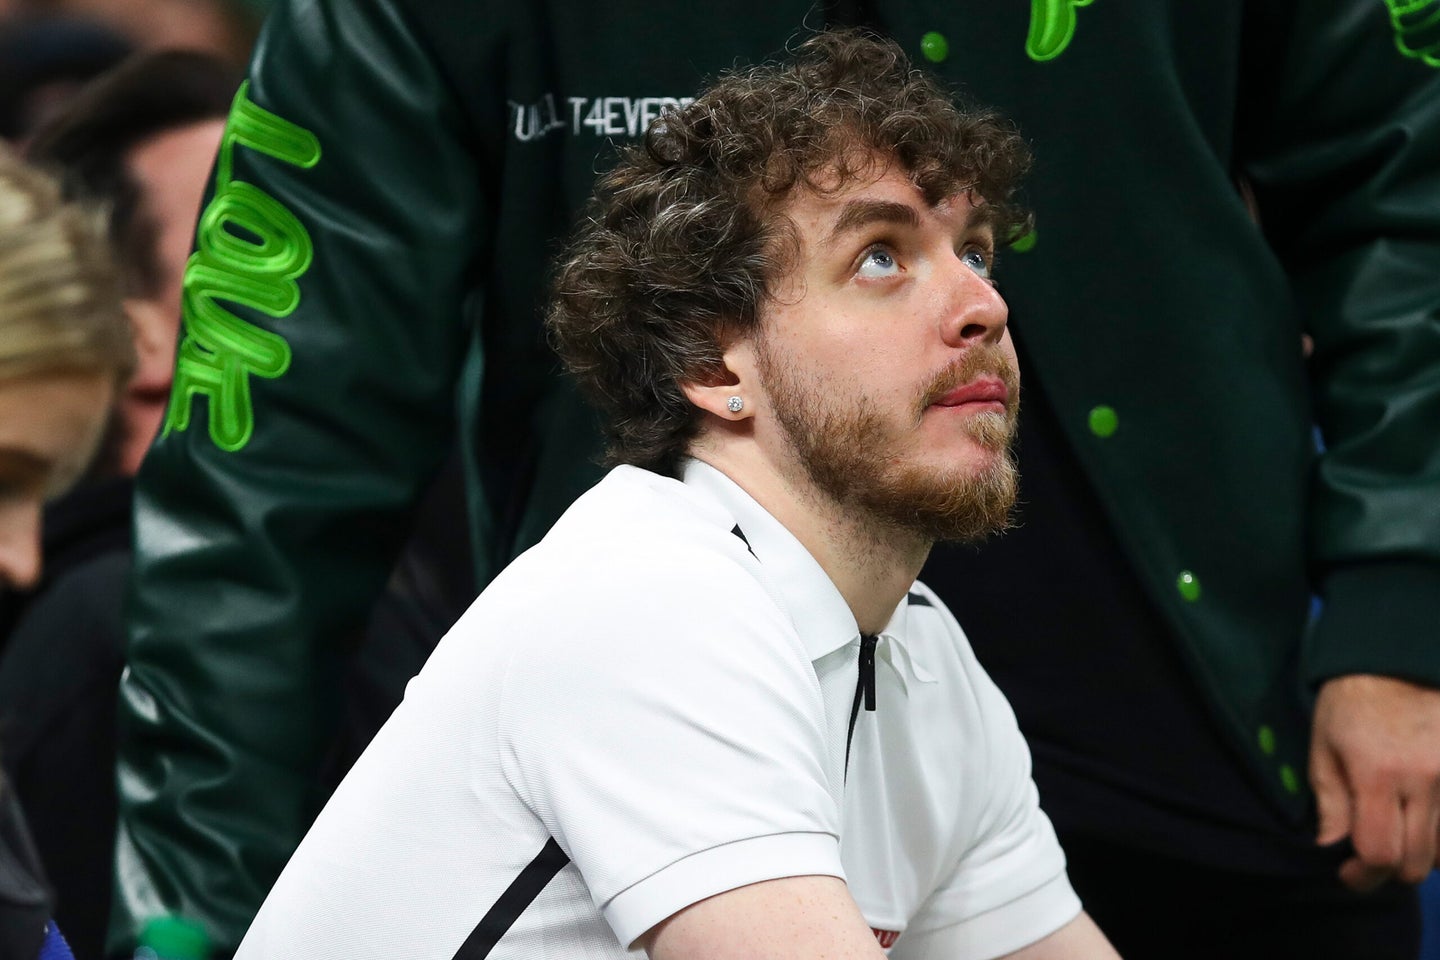 Rapper Jack Harlow looks on during Game One of the Eastern Conference Semifinals between the Boston Celtics and the Milwaukee Bucks.